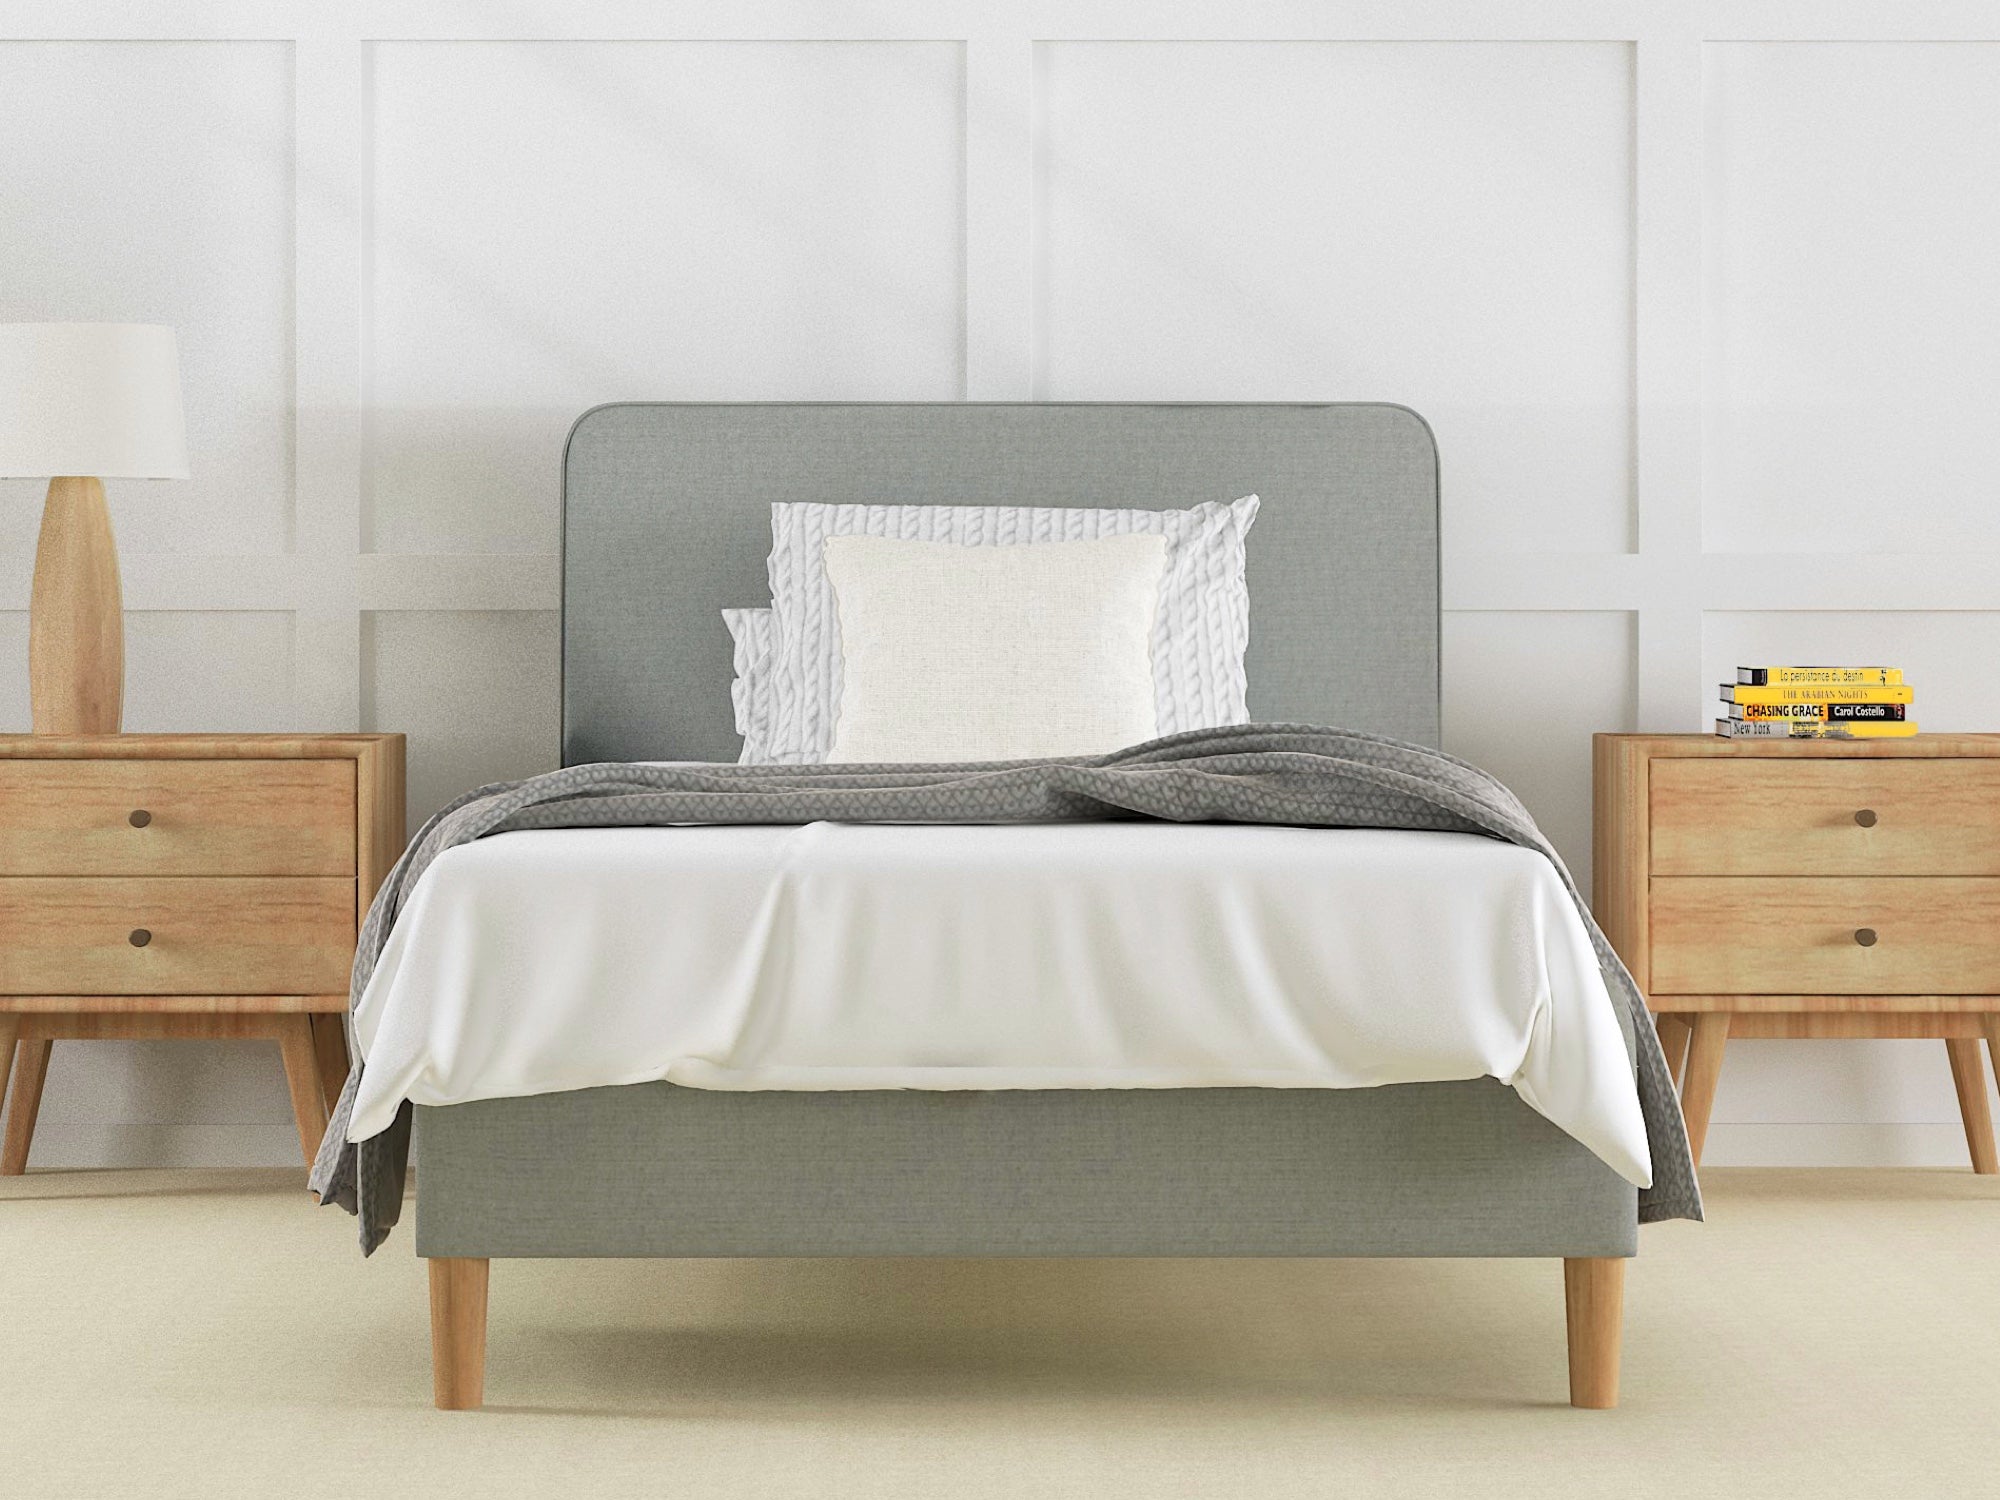 the tailored bed frame